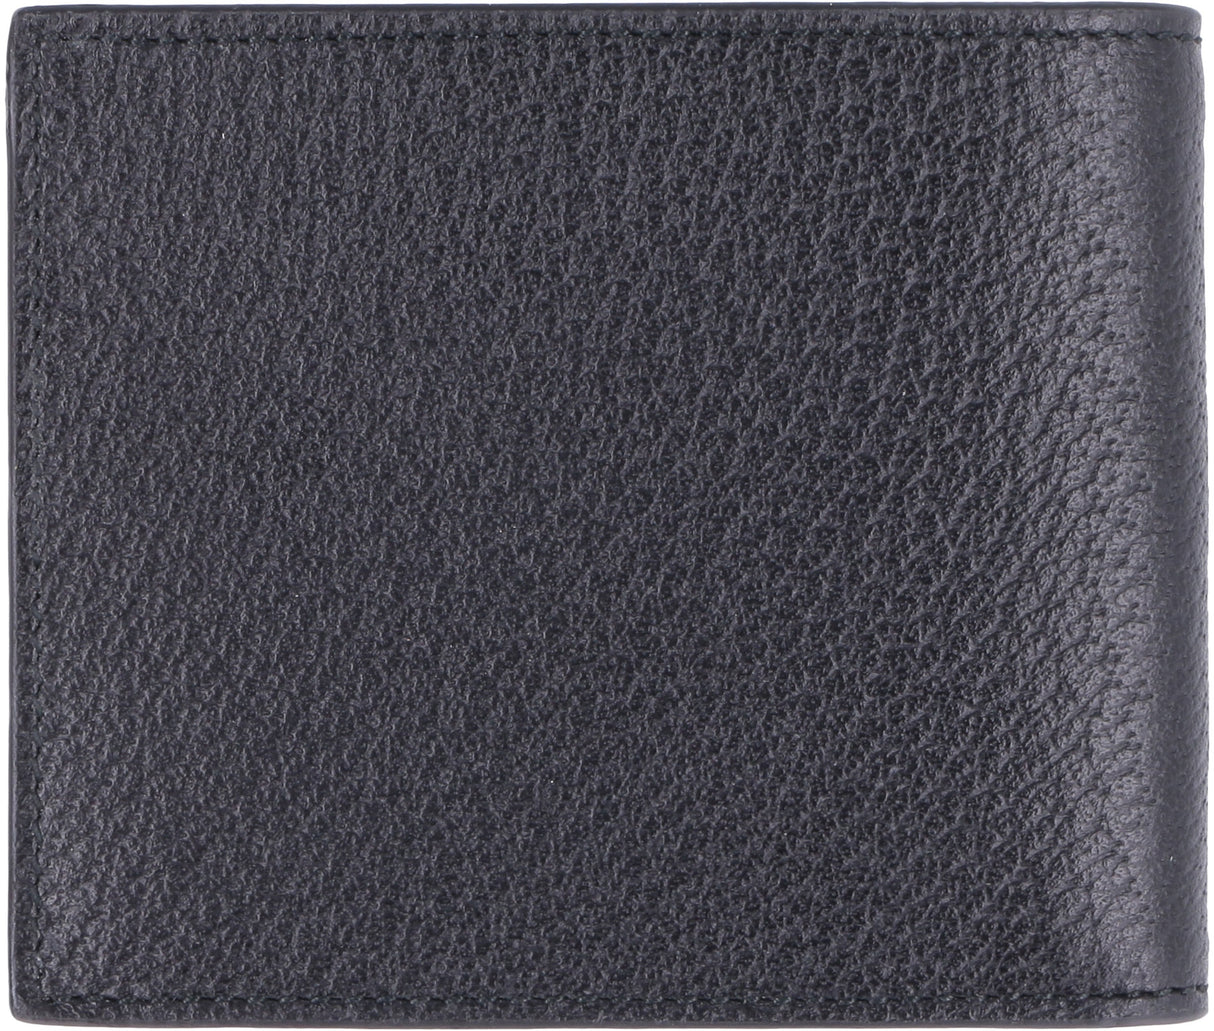 GUCCI Men's Black Leather GG Marmont Wallet for SS24